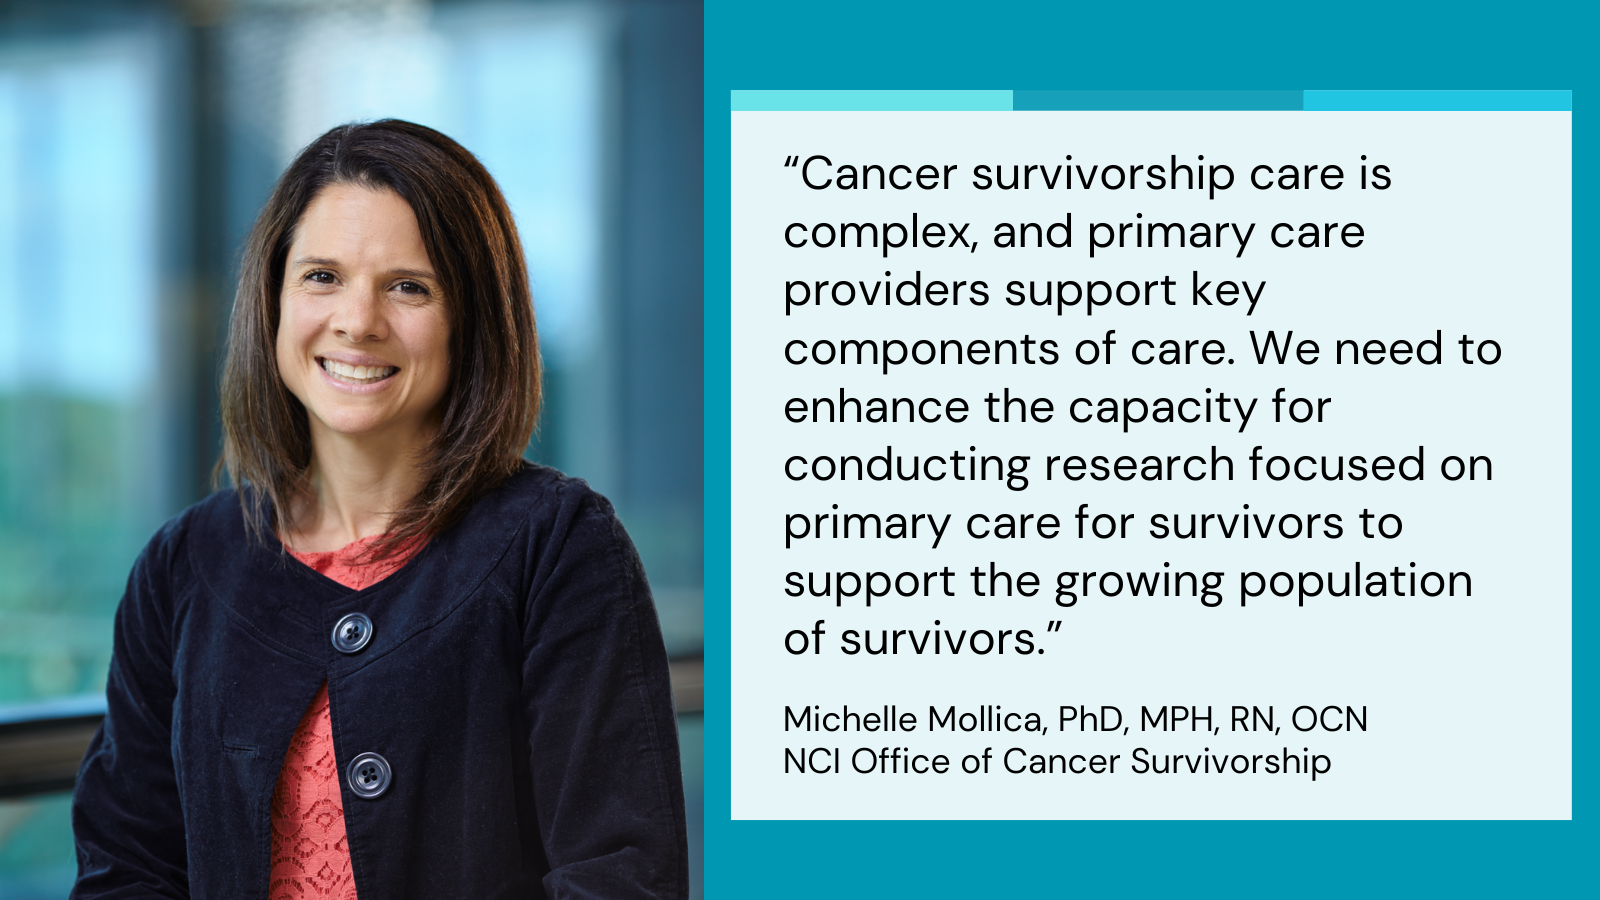 Quote 3. Cancer survivorship care is complex, and primary care providers support key components of care. We need to enhance the capacity for conducting research focused on primary care for survivors to support the growing population of survivors. Michelle Mollica, PhD, MPH, RN, OCN, NCI Office of Cancer Survivorship.